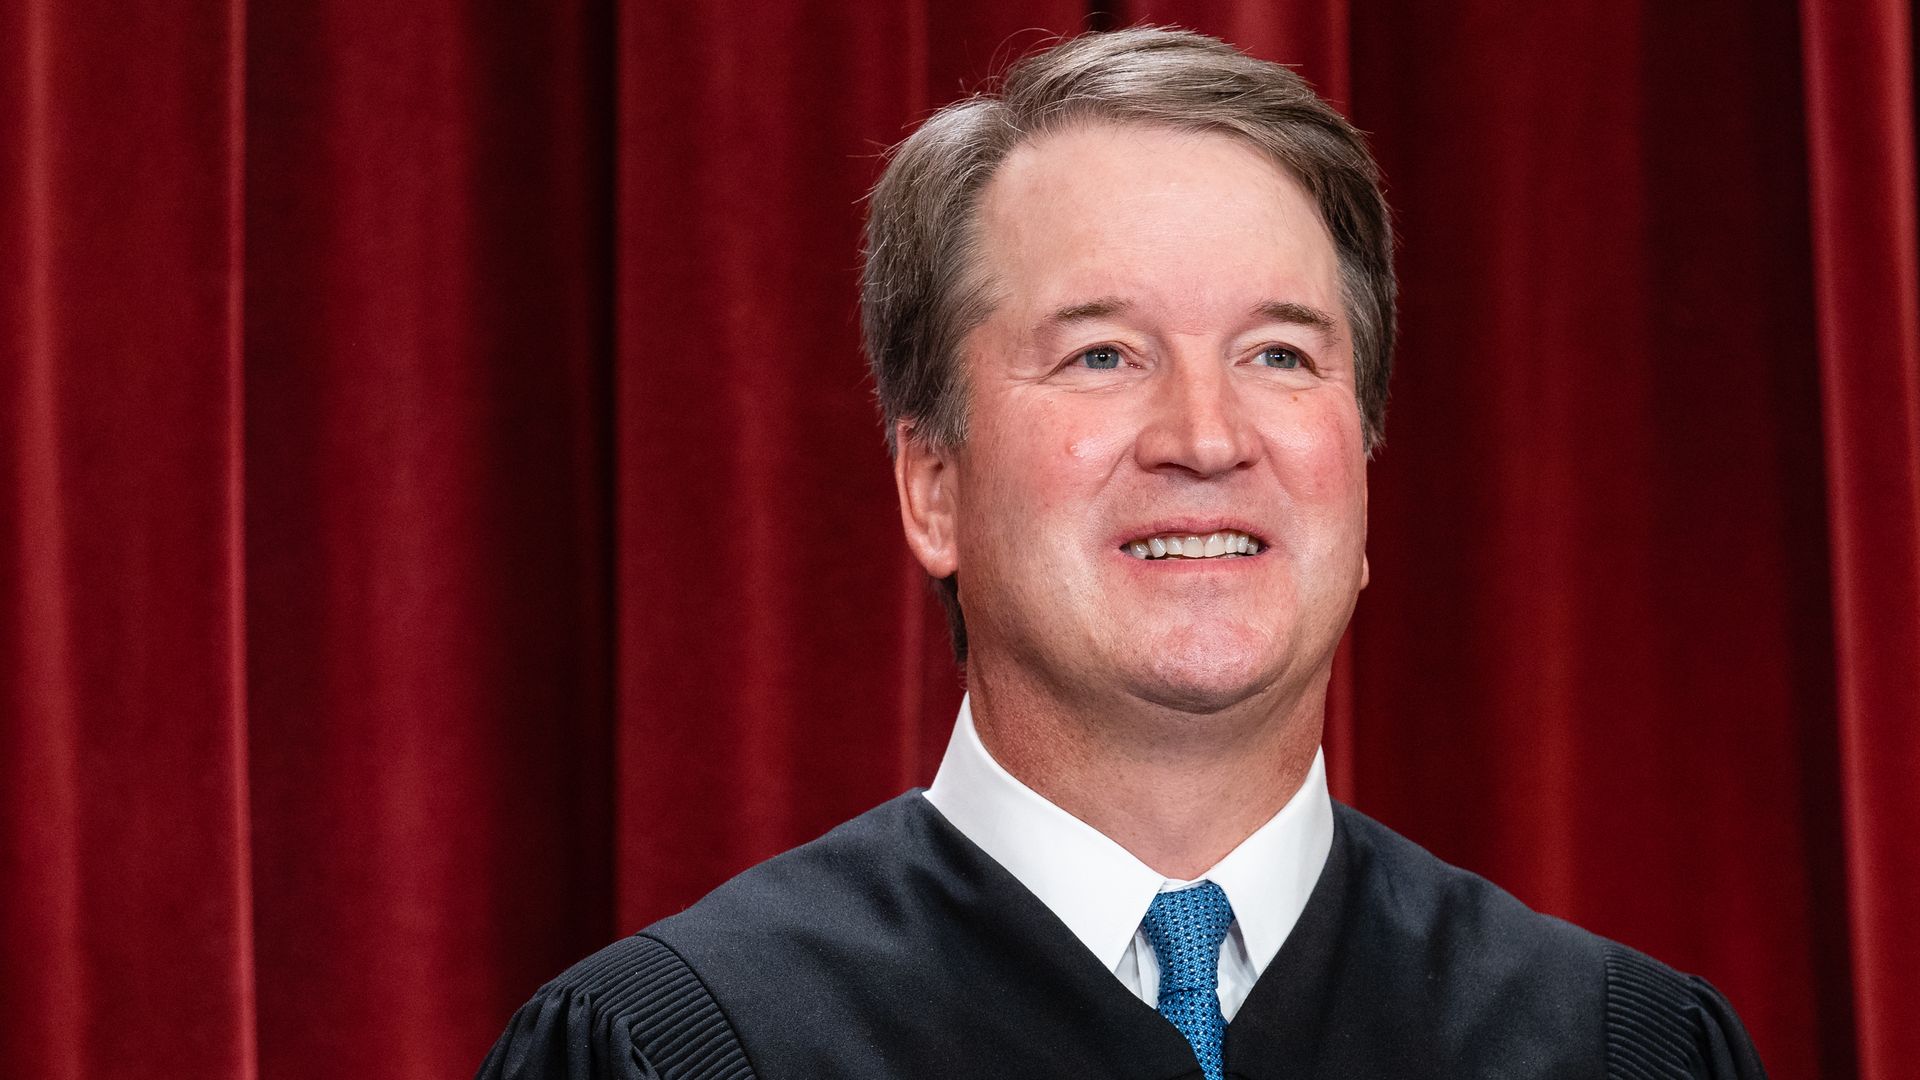 Justice Brett Kavanaugh at the Supreme Court in Washington, D.C., in October 2022.